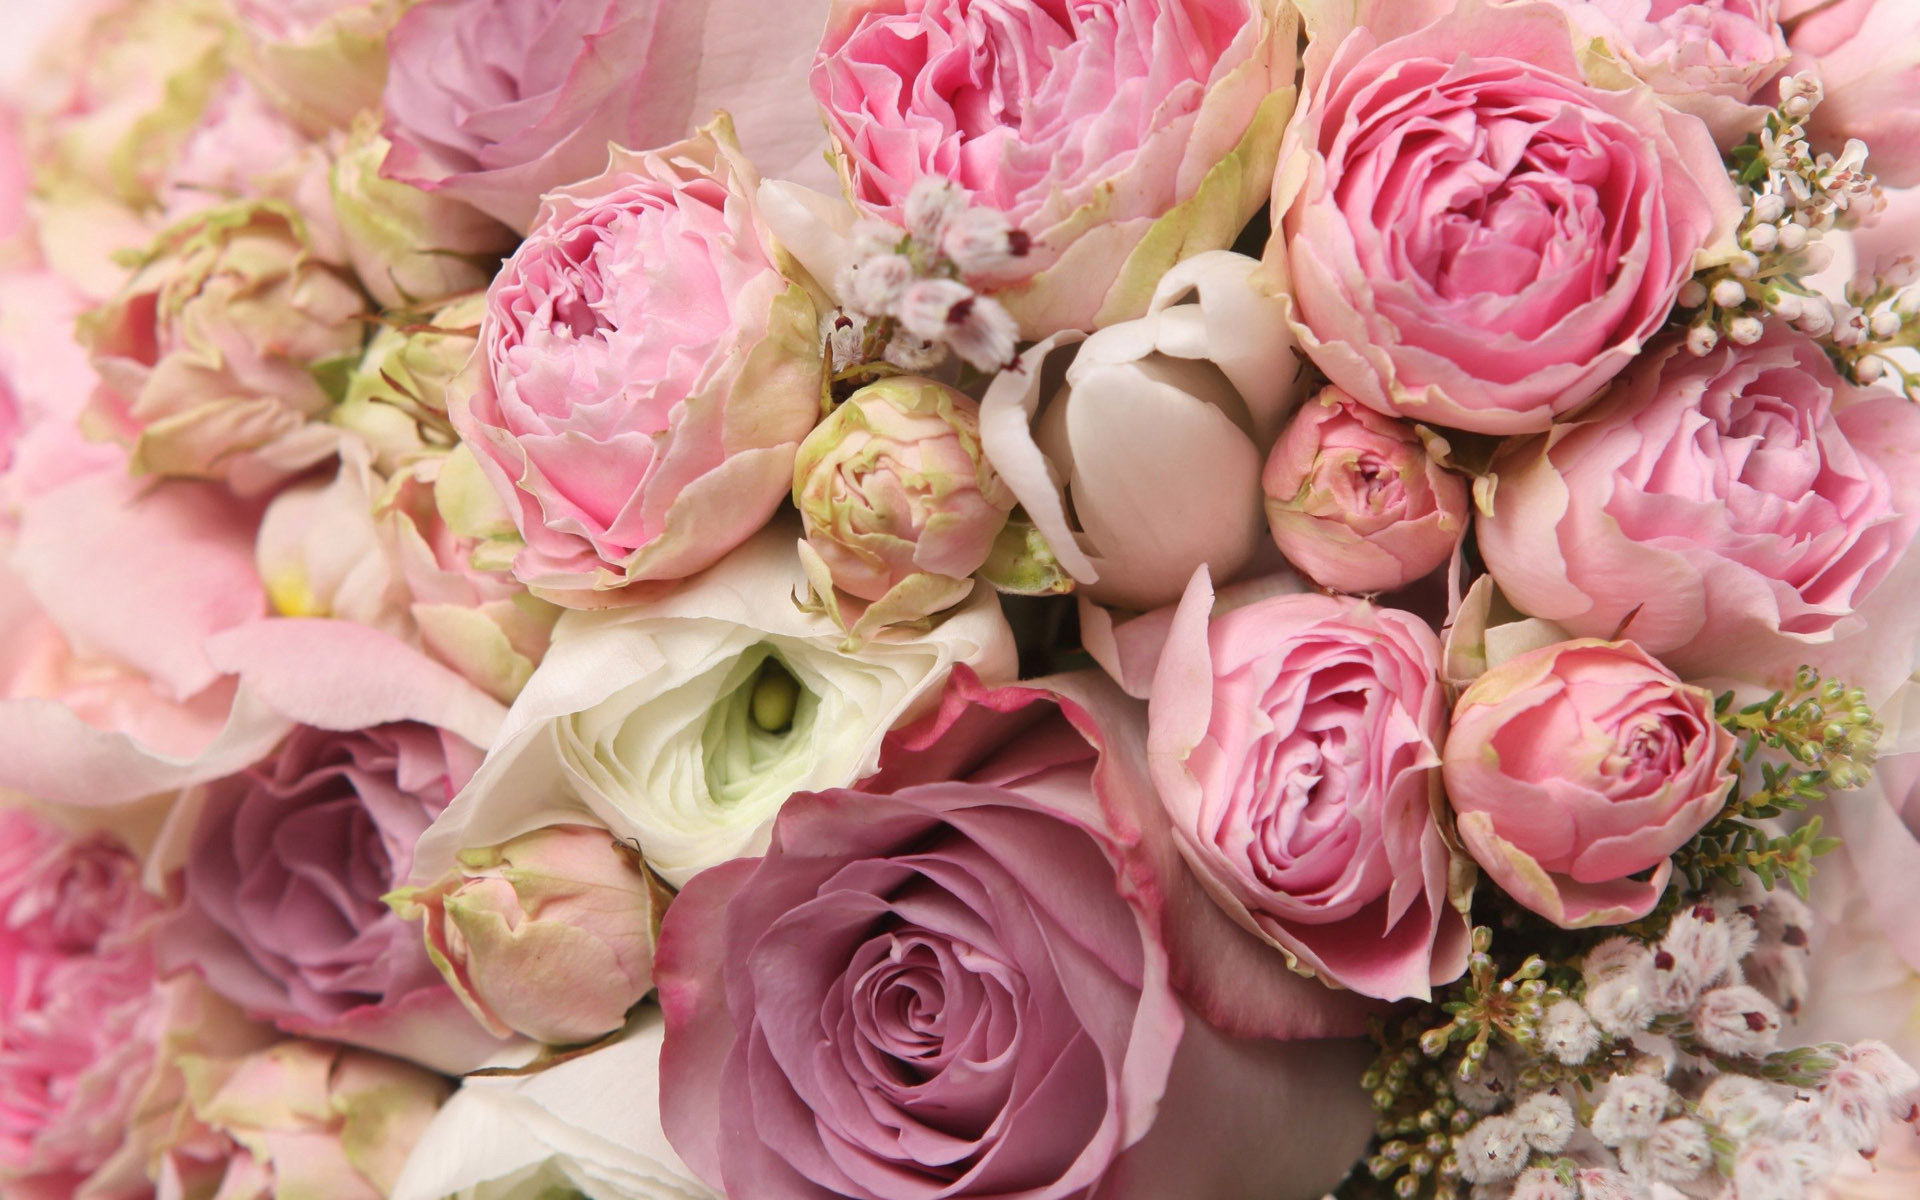 Roses and peonies bouquet wallpaper 18426 1920x1200